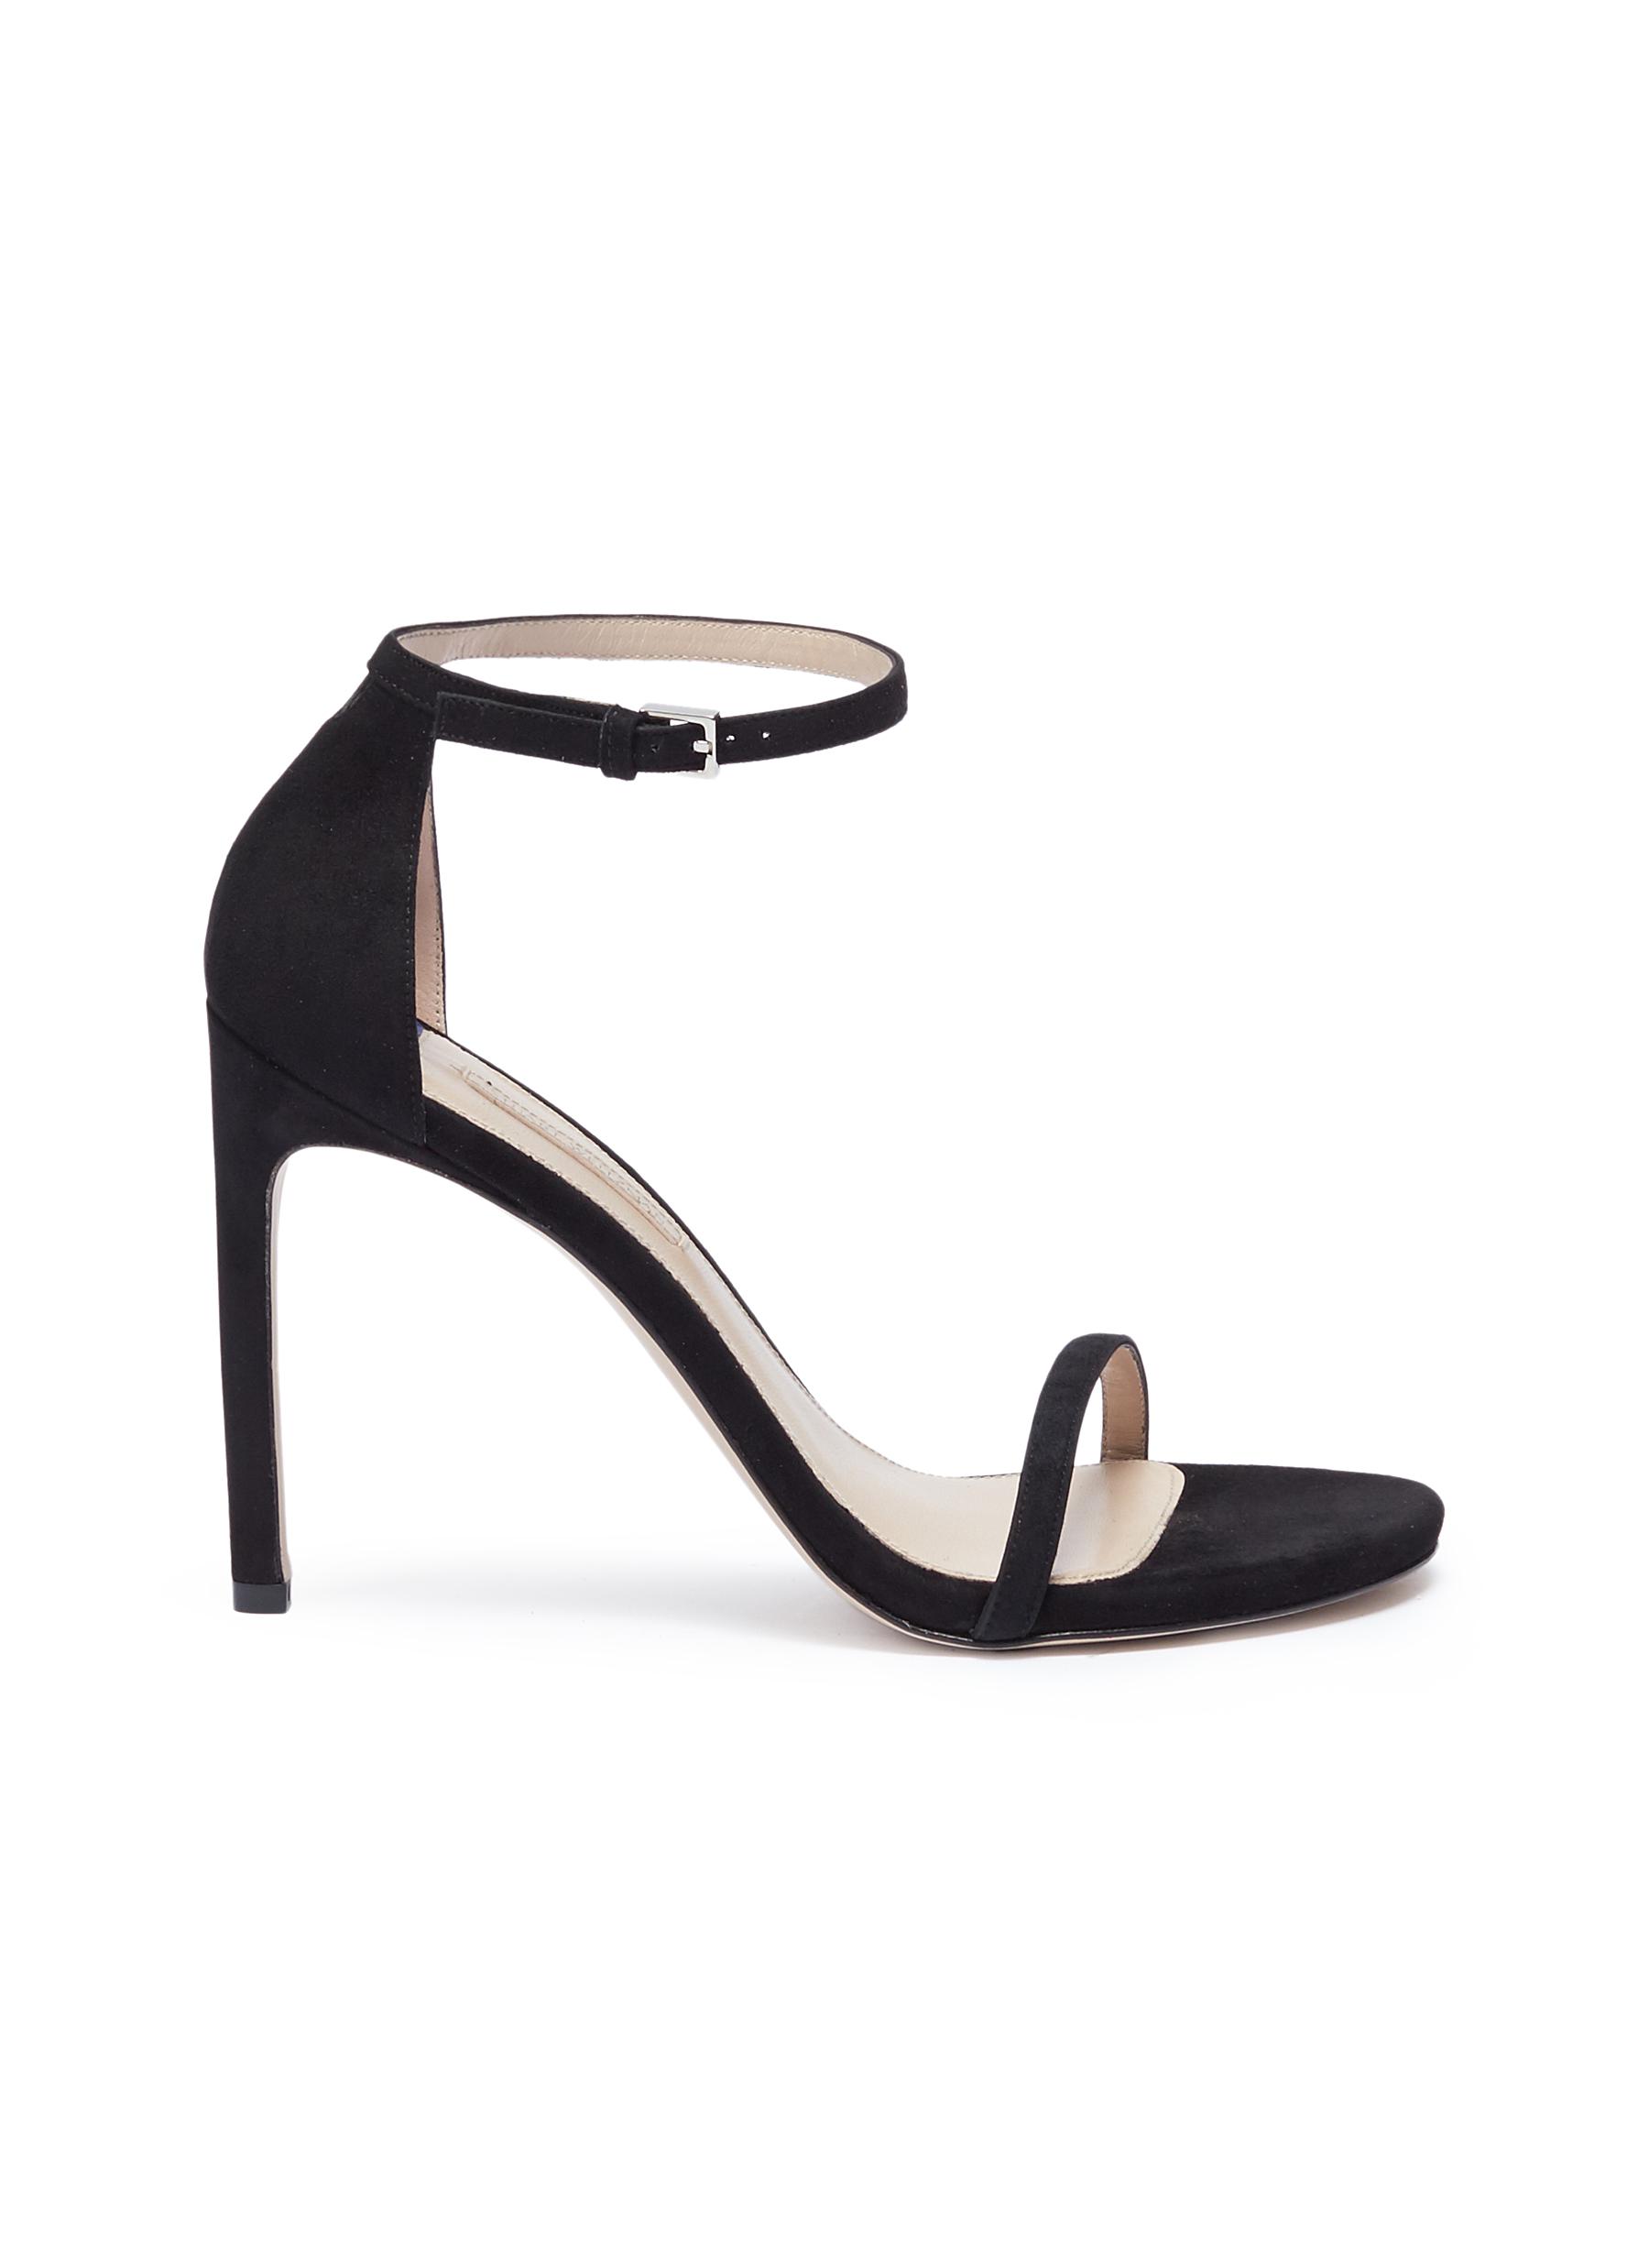 Nudistsong ankle strap suede sandals by Stuart Weitzman